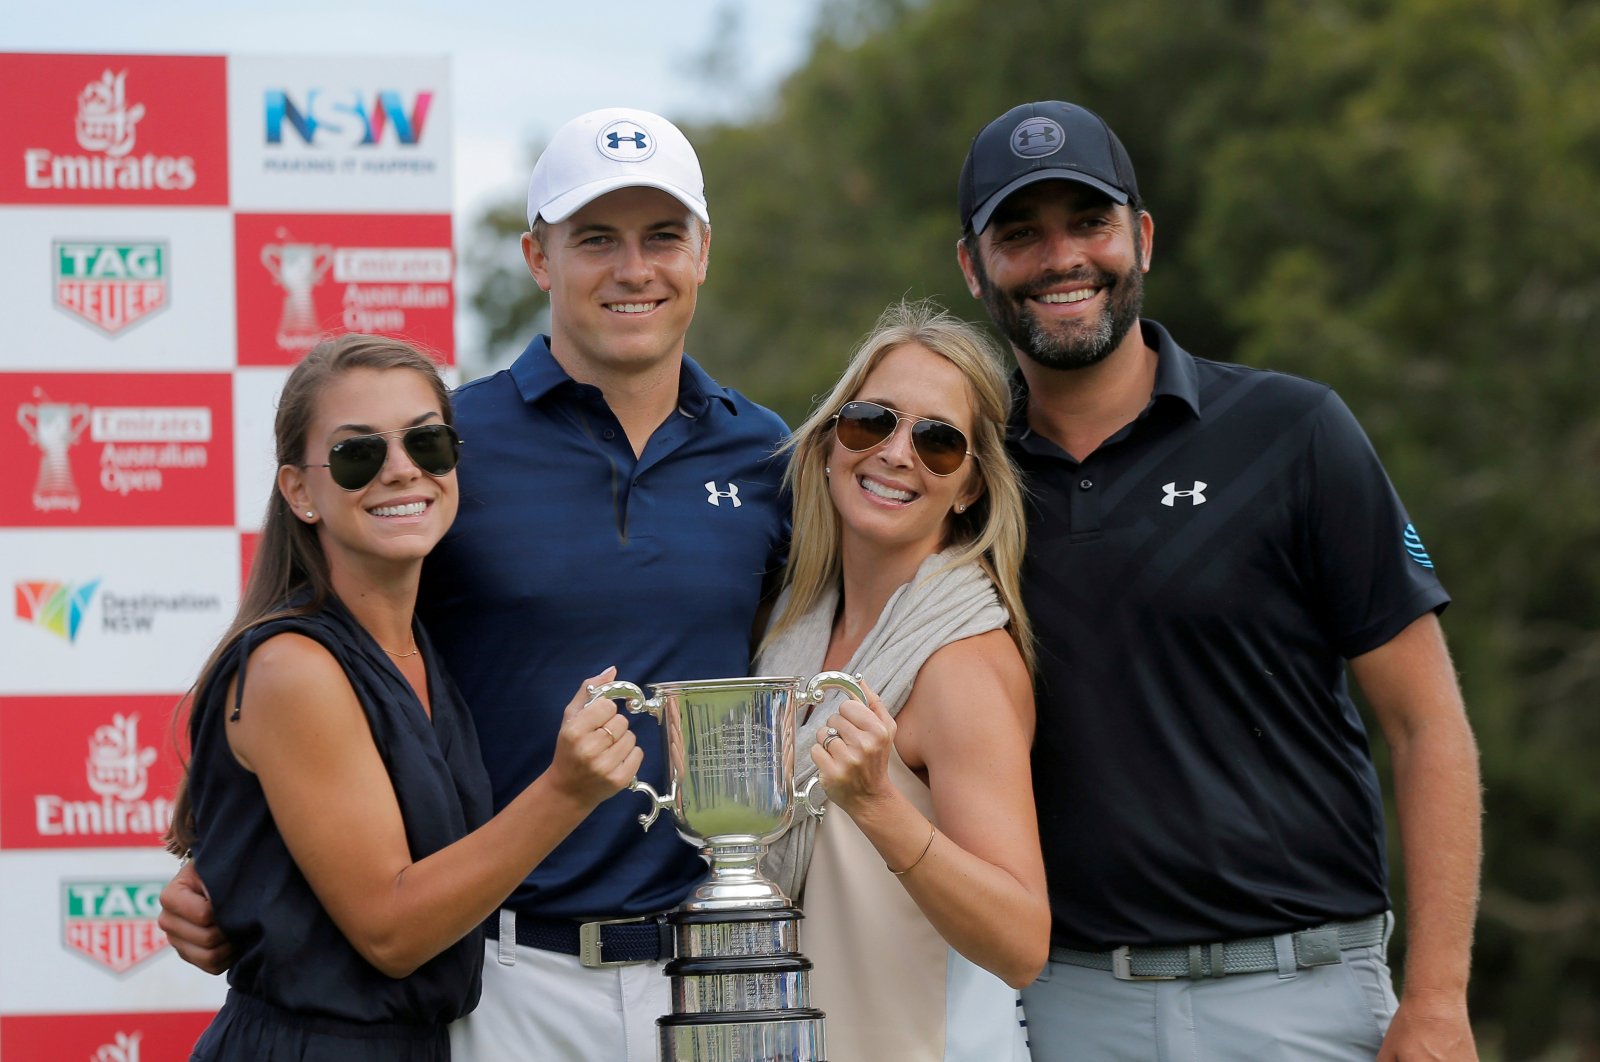 Jordan Spieth (second L) poses with the Stonehaven Cup after winning the Australian Open alongside his girlfriend Annie Verret (L), his caddie Michael Greller (R) and Greller's wife Ellie, Nov. 20, 2016. (REUTERS Photo)